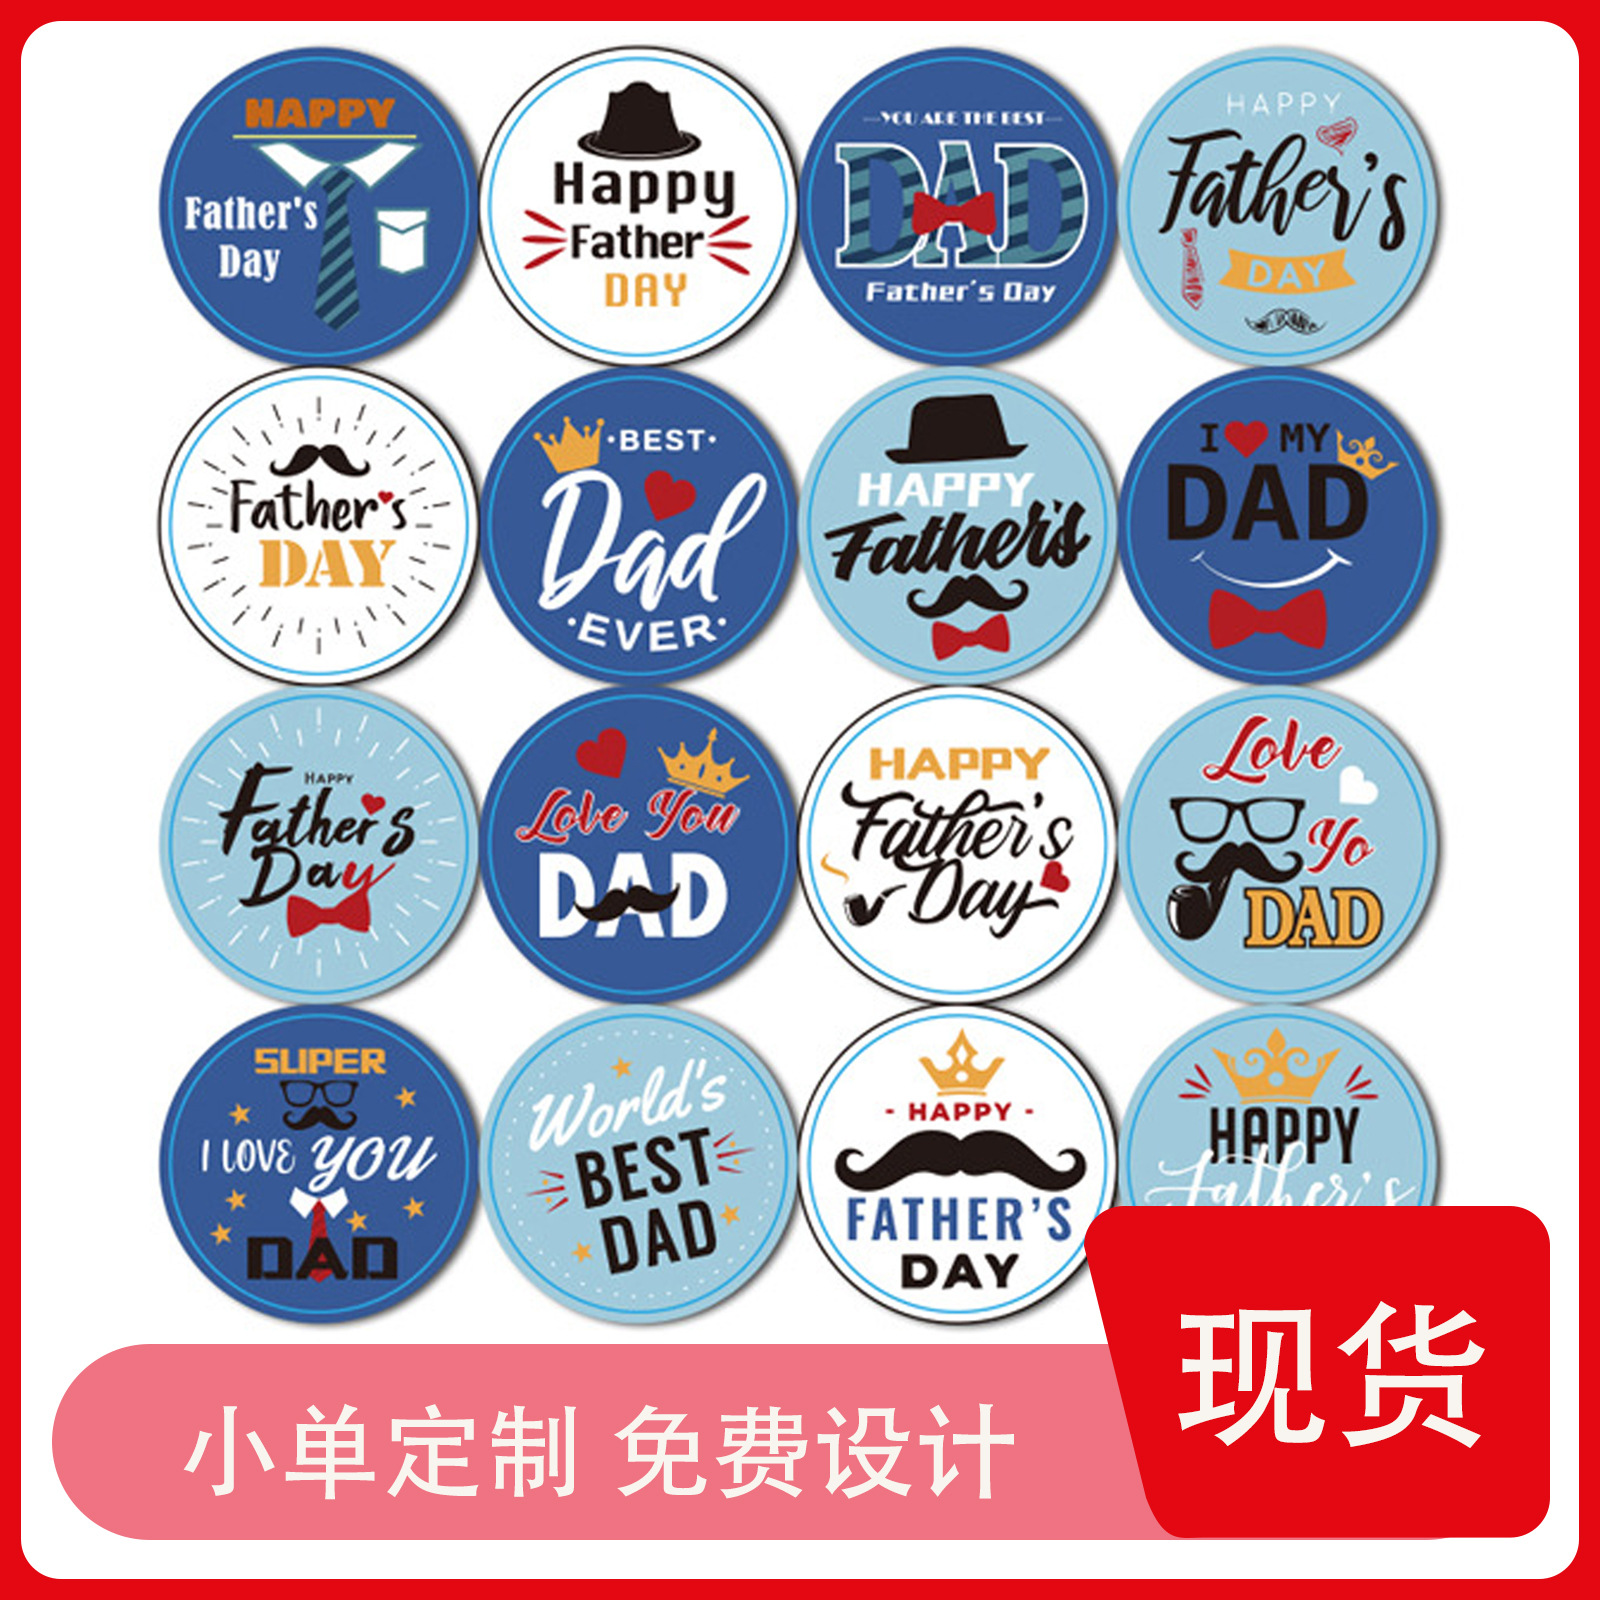 Exclusive for Cross-Border Father's Day Stickers Thanksgiving Stickers Adhesive Stickers Holiday Stickers Decorative Sticker Greeting Cards